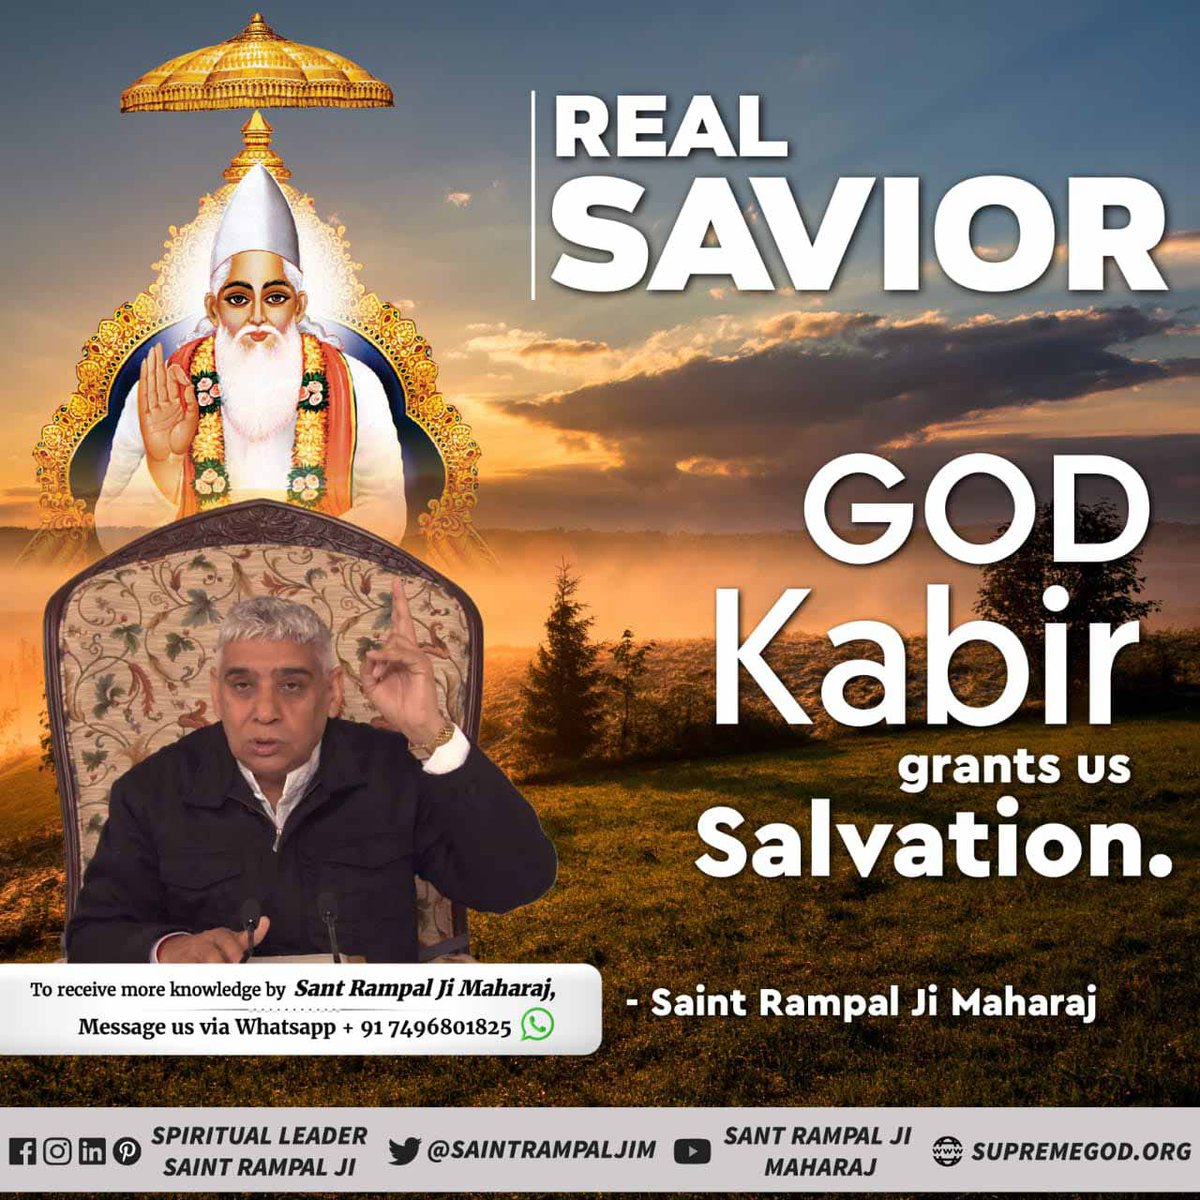 #अविनाशी_परमात्मा_कबीर #GodMorningThursday 🌄🌄 Complete God KavirDev (Supreme God Kabir), even prior to the knowledge of the Vedas, was present in Satlok, and has also Himself appeared in all the four yugas to impart His real knowledge. Sant Rampal Ji Maharaj @anitada23854181